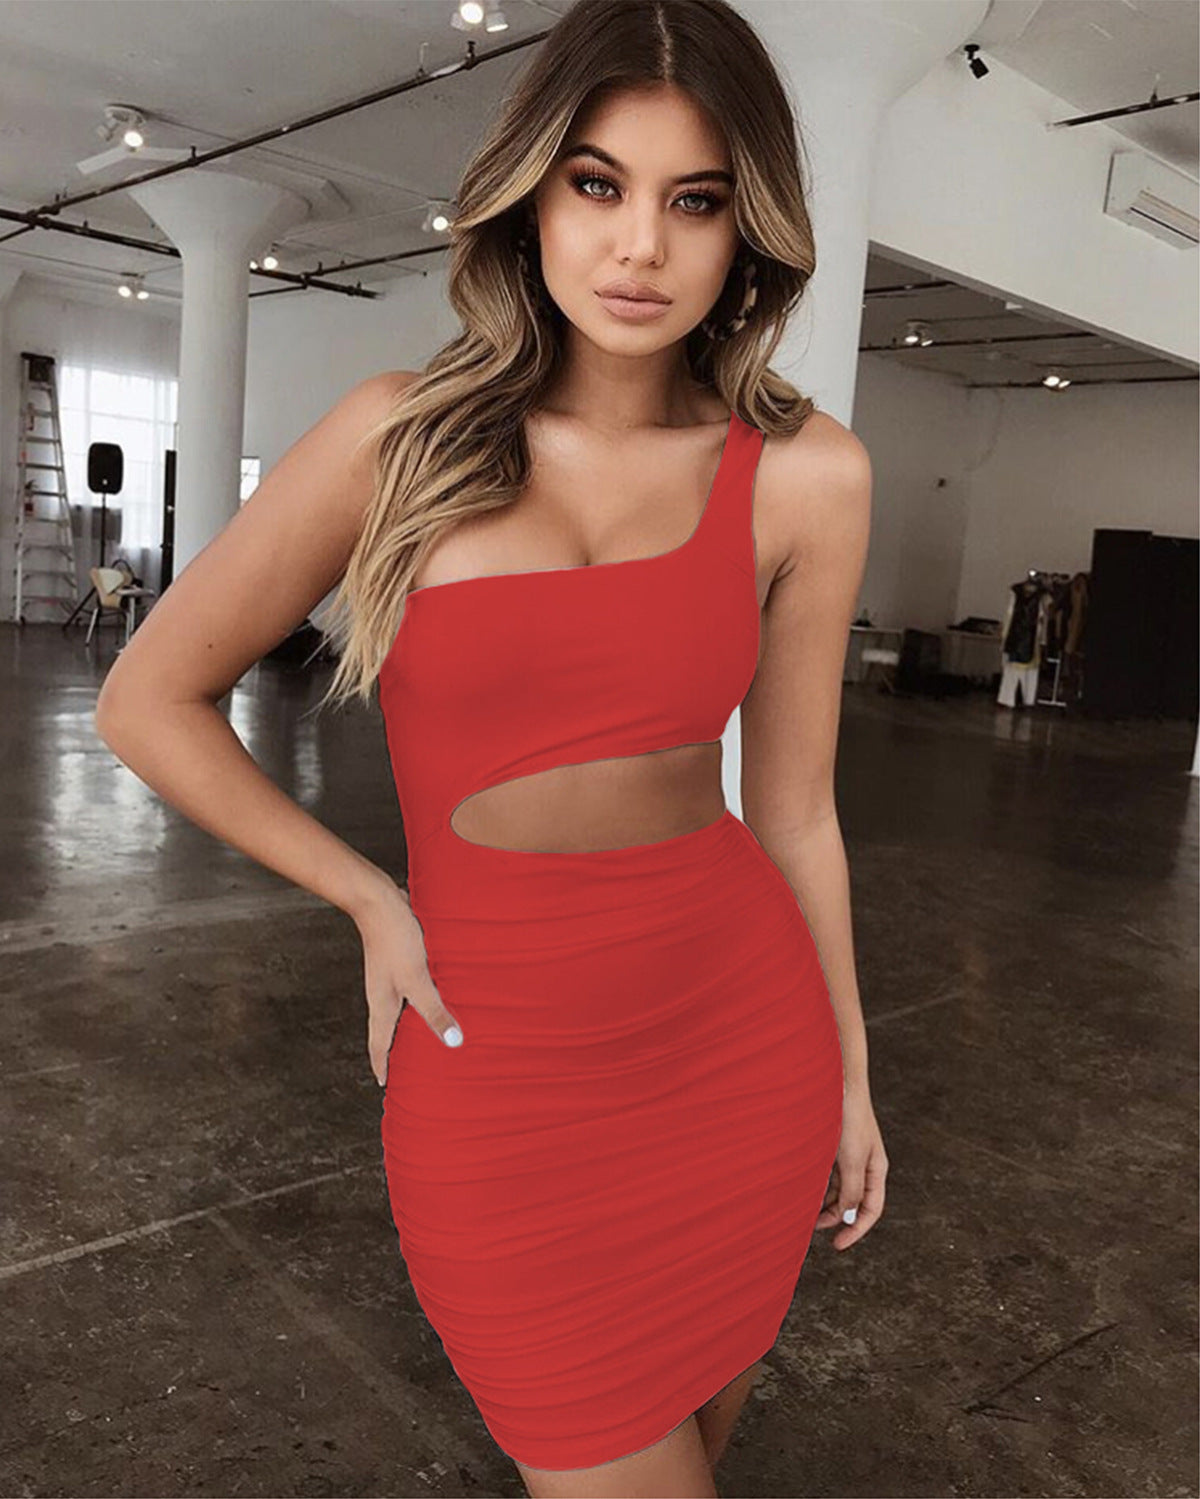 One Shoulder Cut Out Bodycon Dress